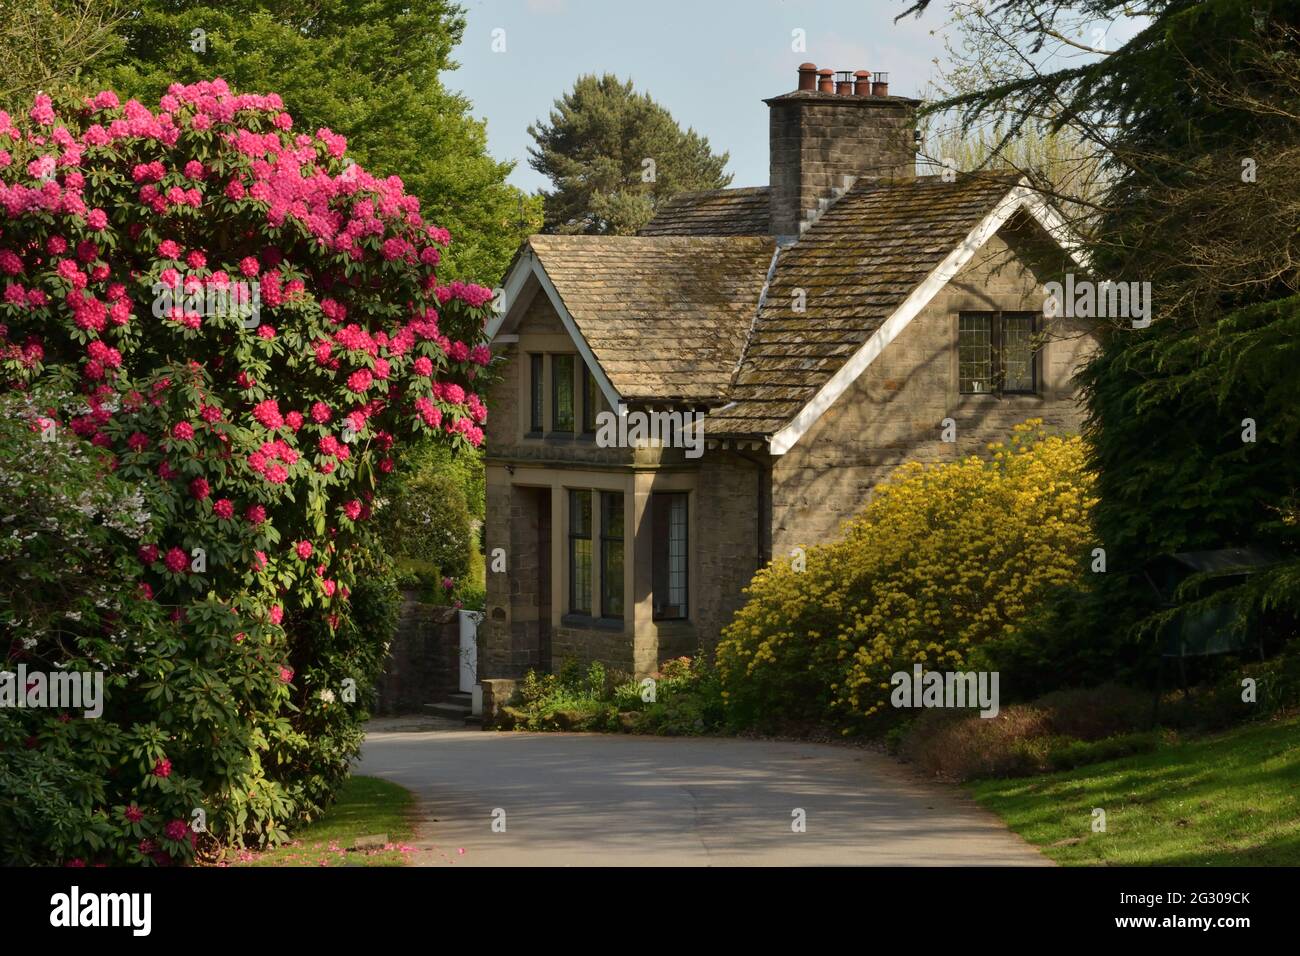 The Lodge House by the entrance to Whirlow Park, a public park in the south western suburbs of the city of Sheffield, England, UK. Stock Photo